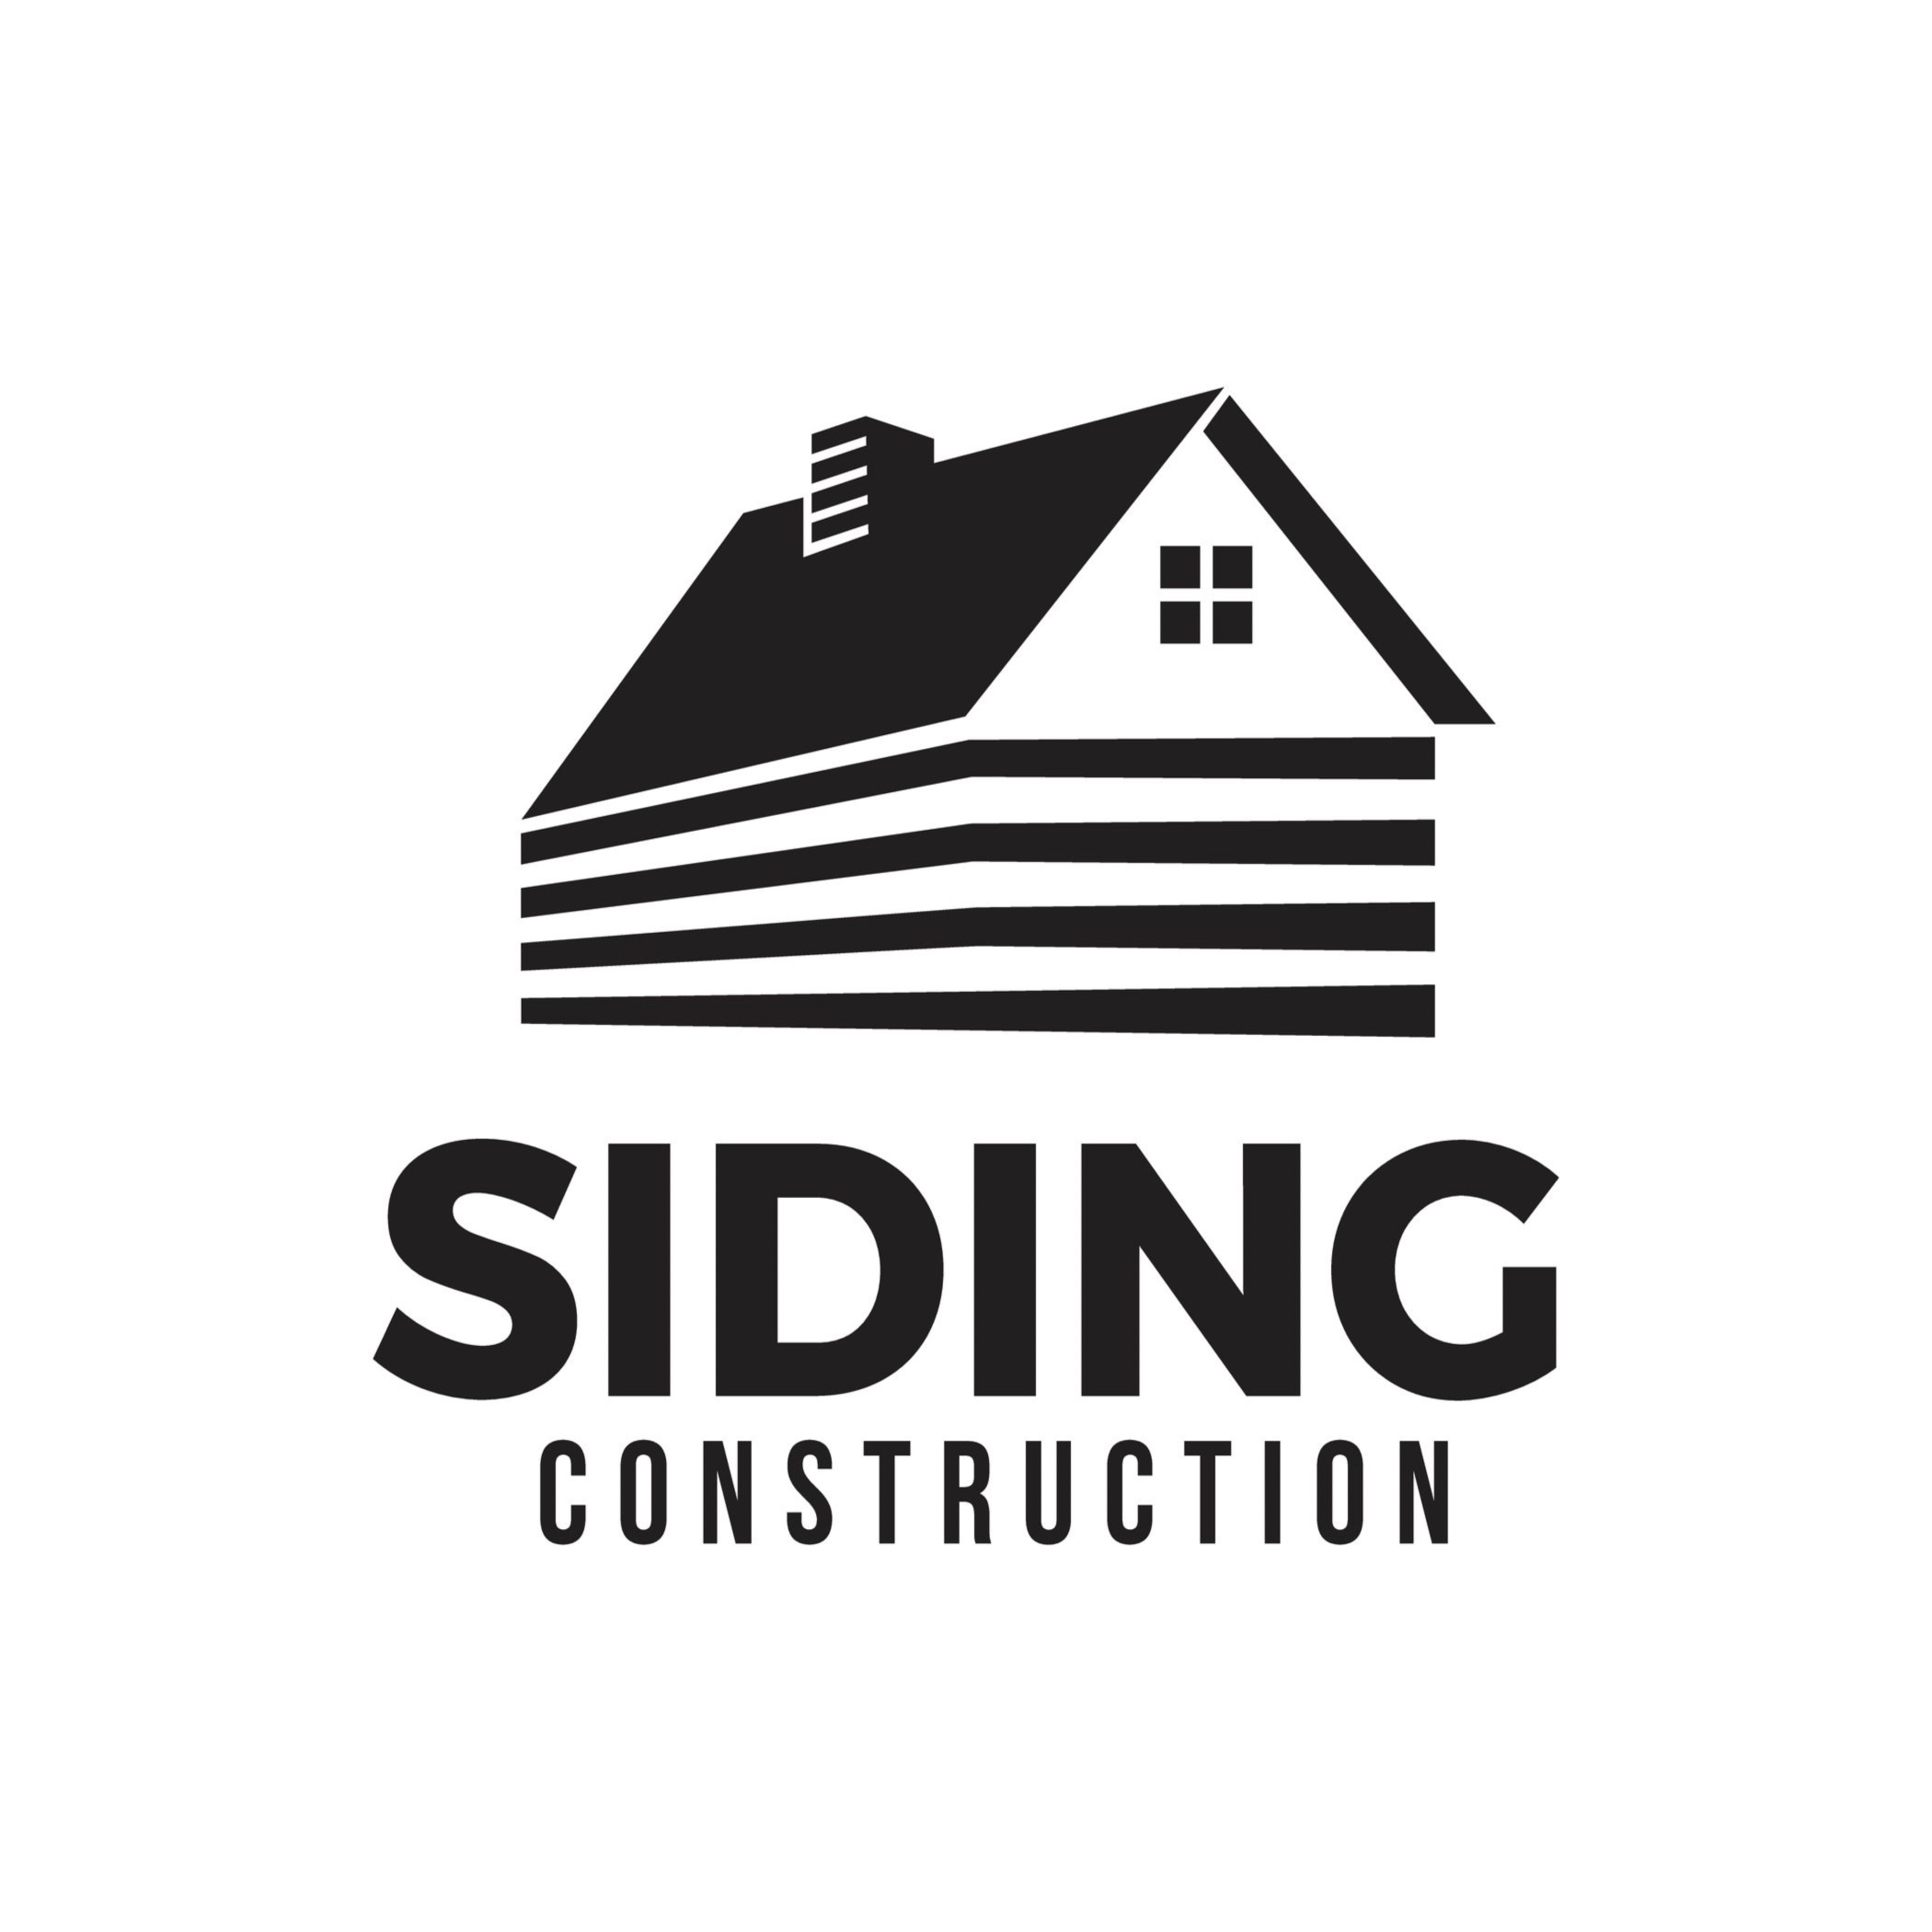 Who to Call in Kenmore to Schedule a Siding Contractor for Your Home!